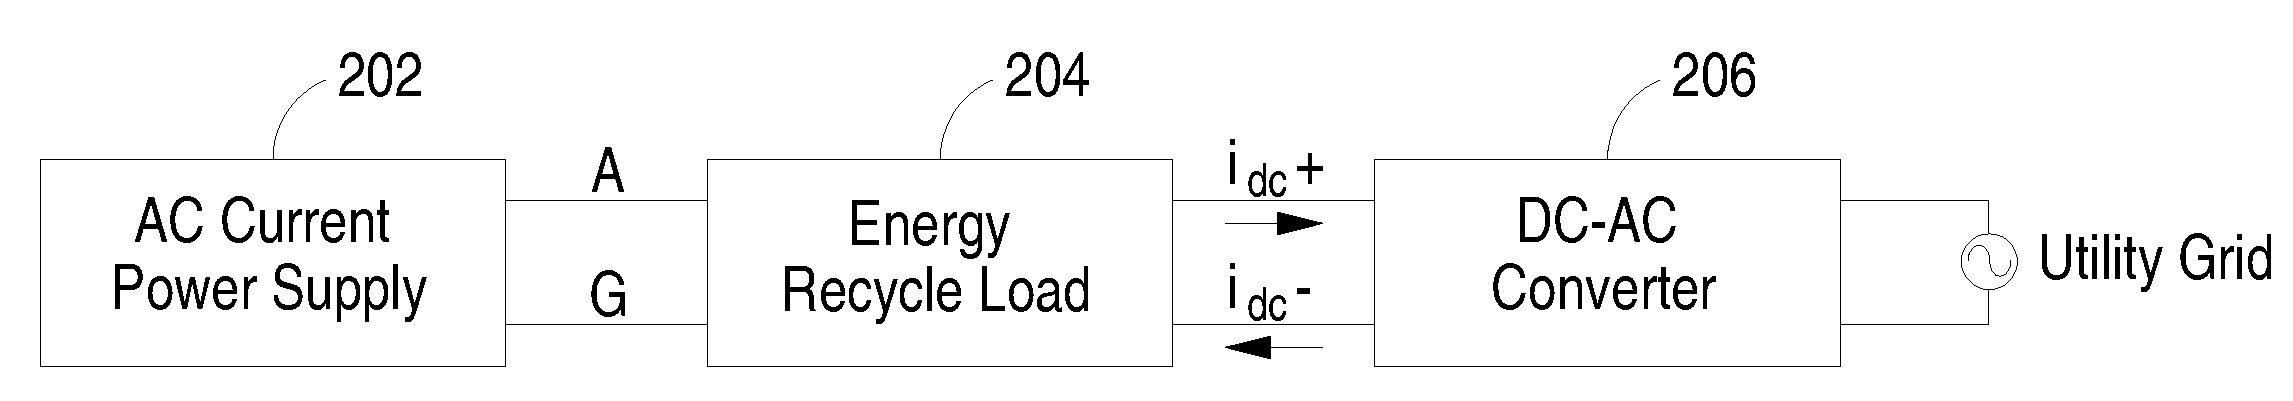 Energy recycle system for use with ac current power supply